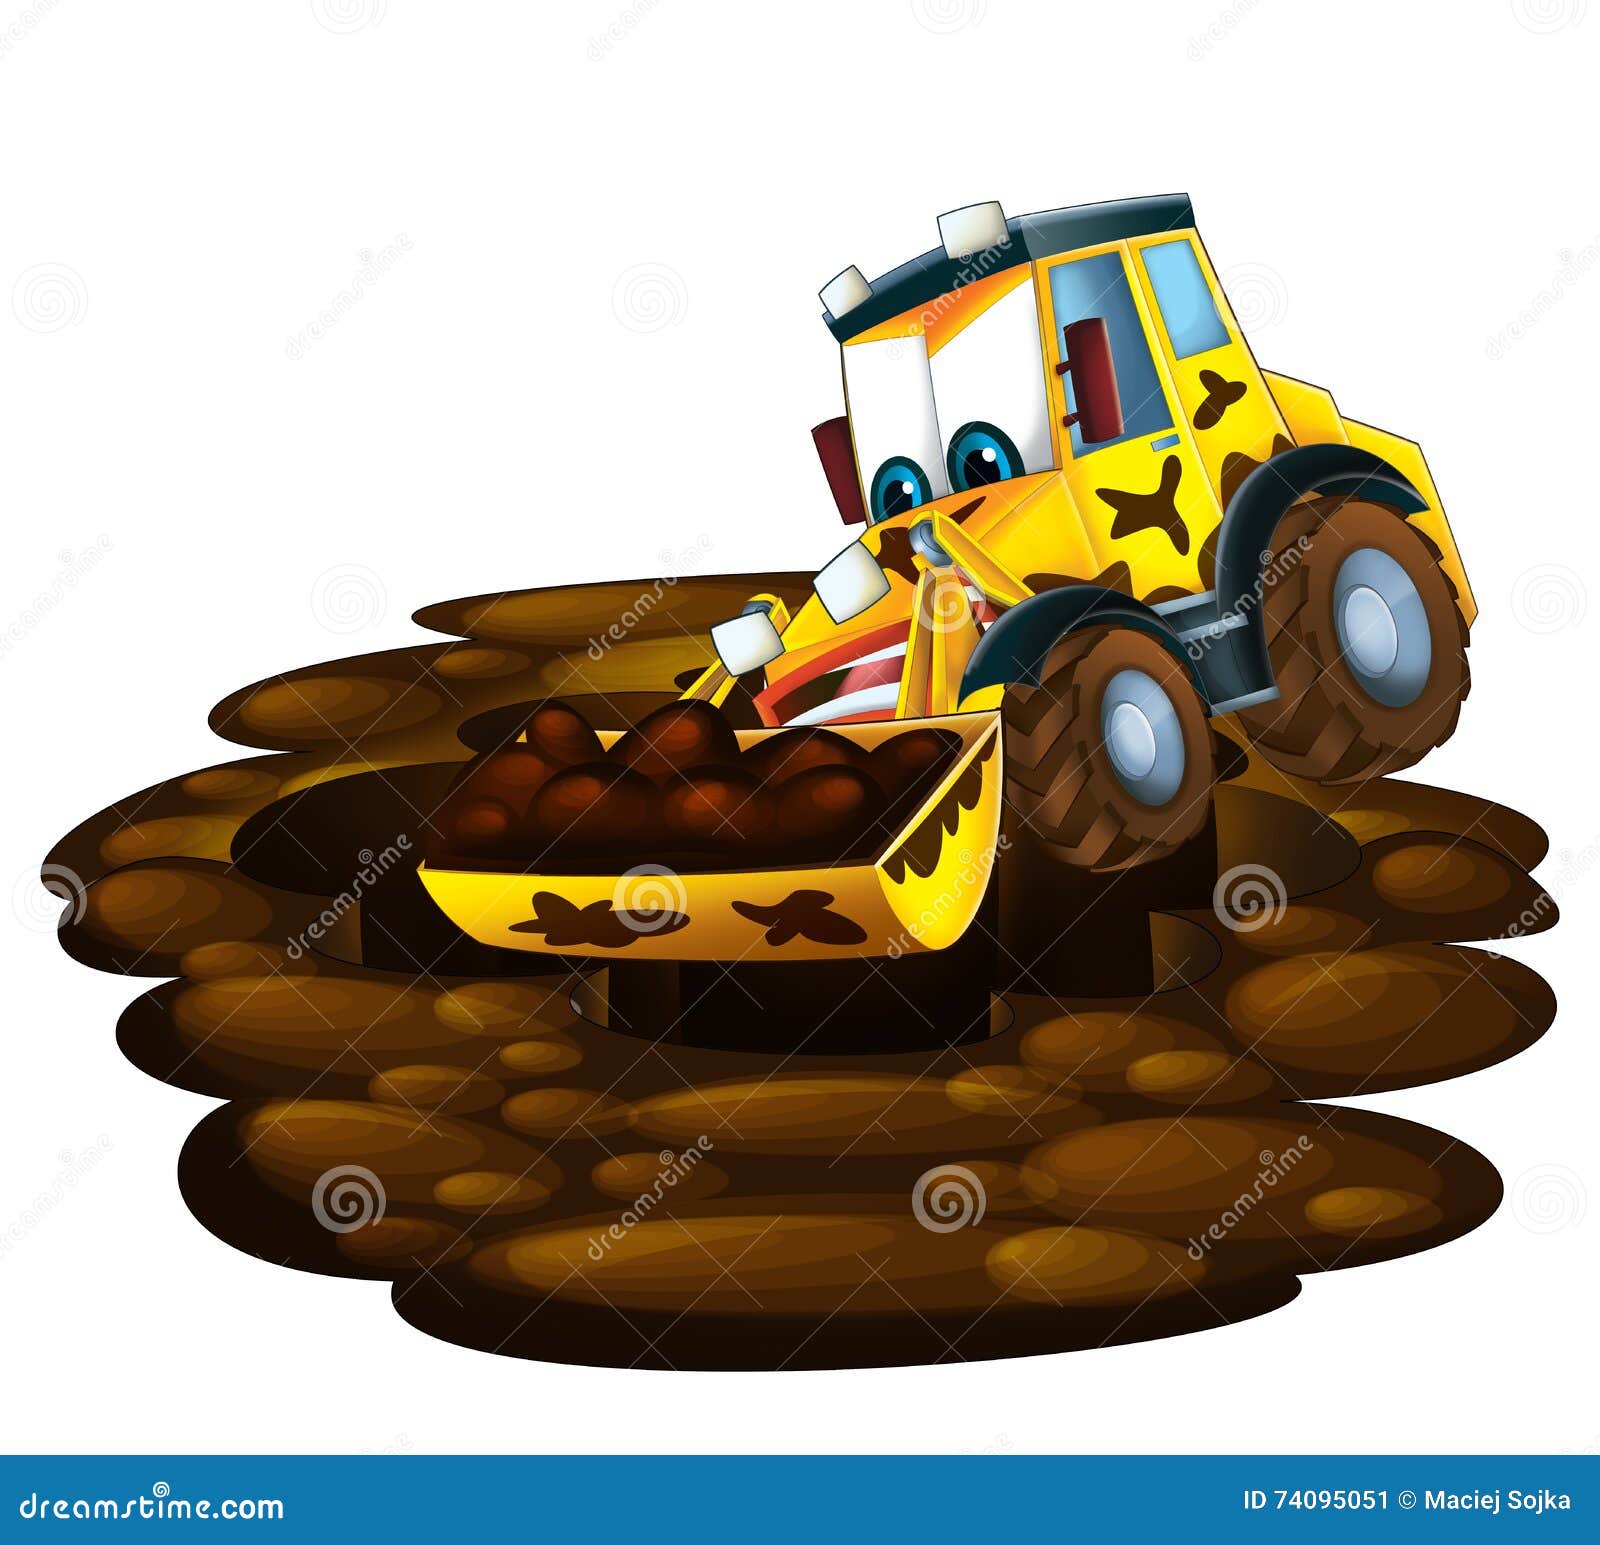 Hand Drawn cute yellow tractor illustration 11887623 PNG